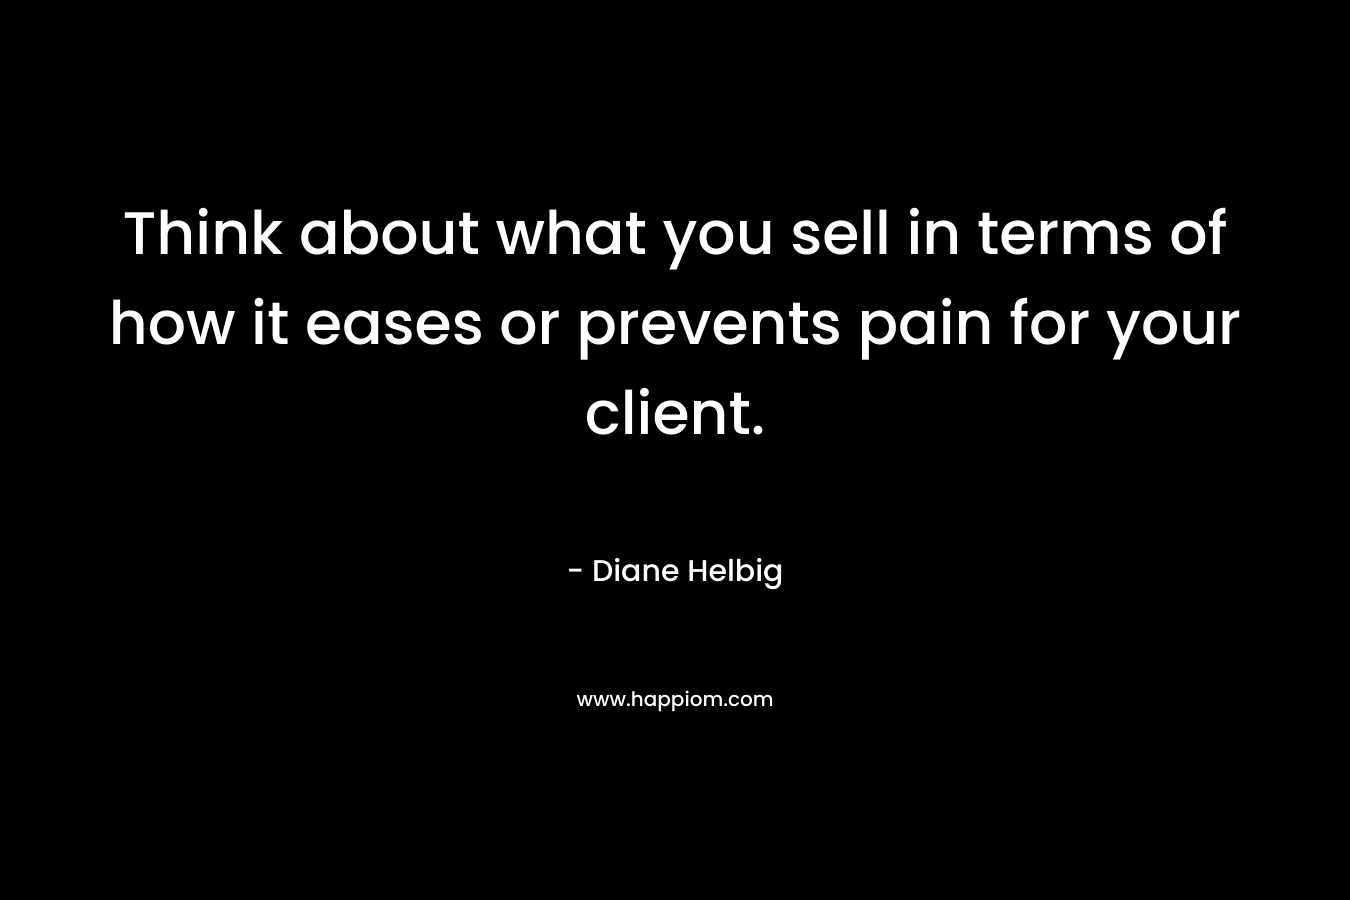 Think about what you sell in terms of how it eases or prevents pain for your client.